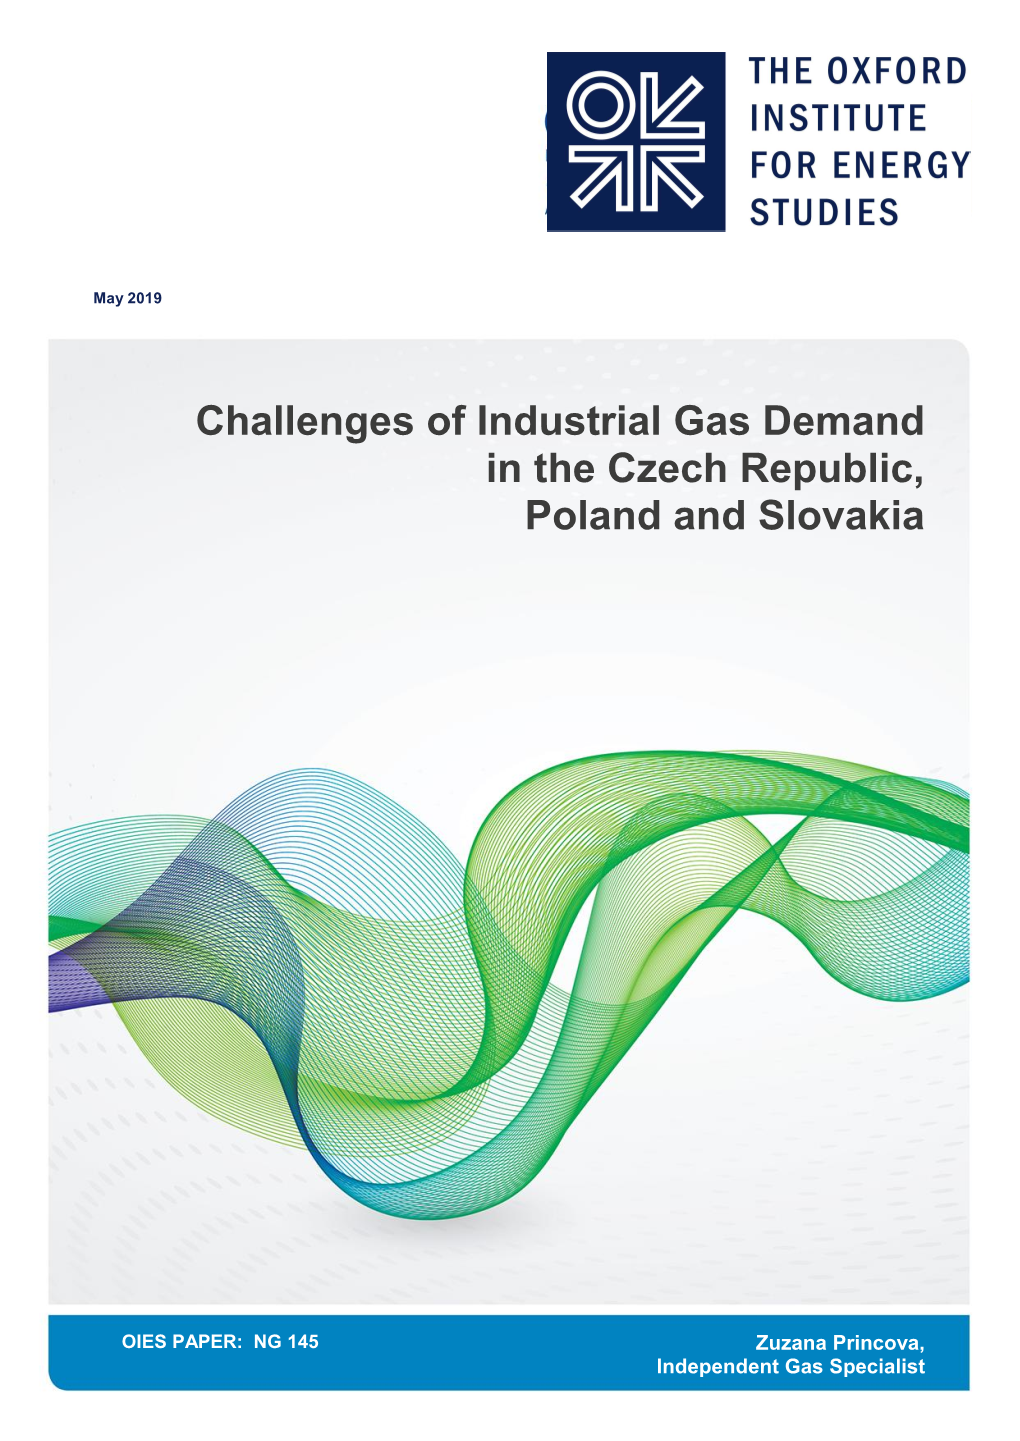 Challenges of Industrial Gas Demand in the Czech Republic, Poland and Slovakia